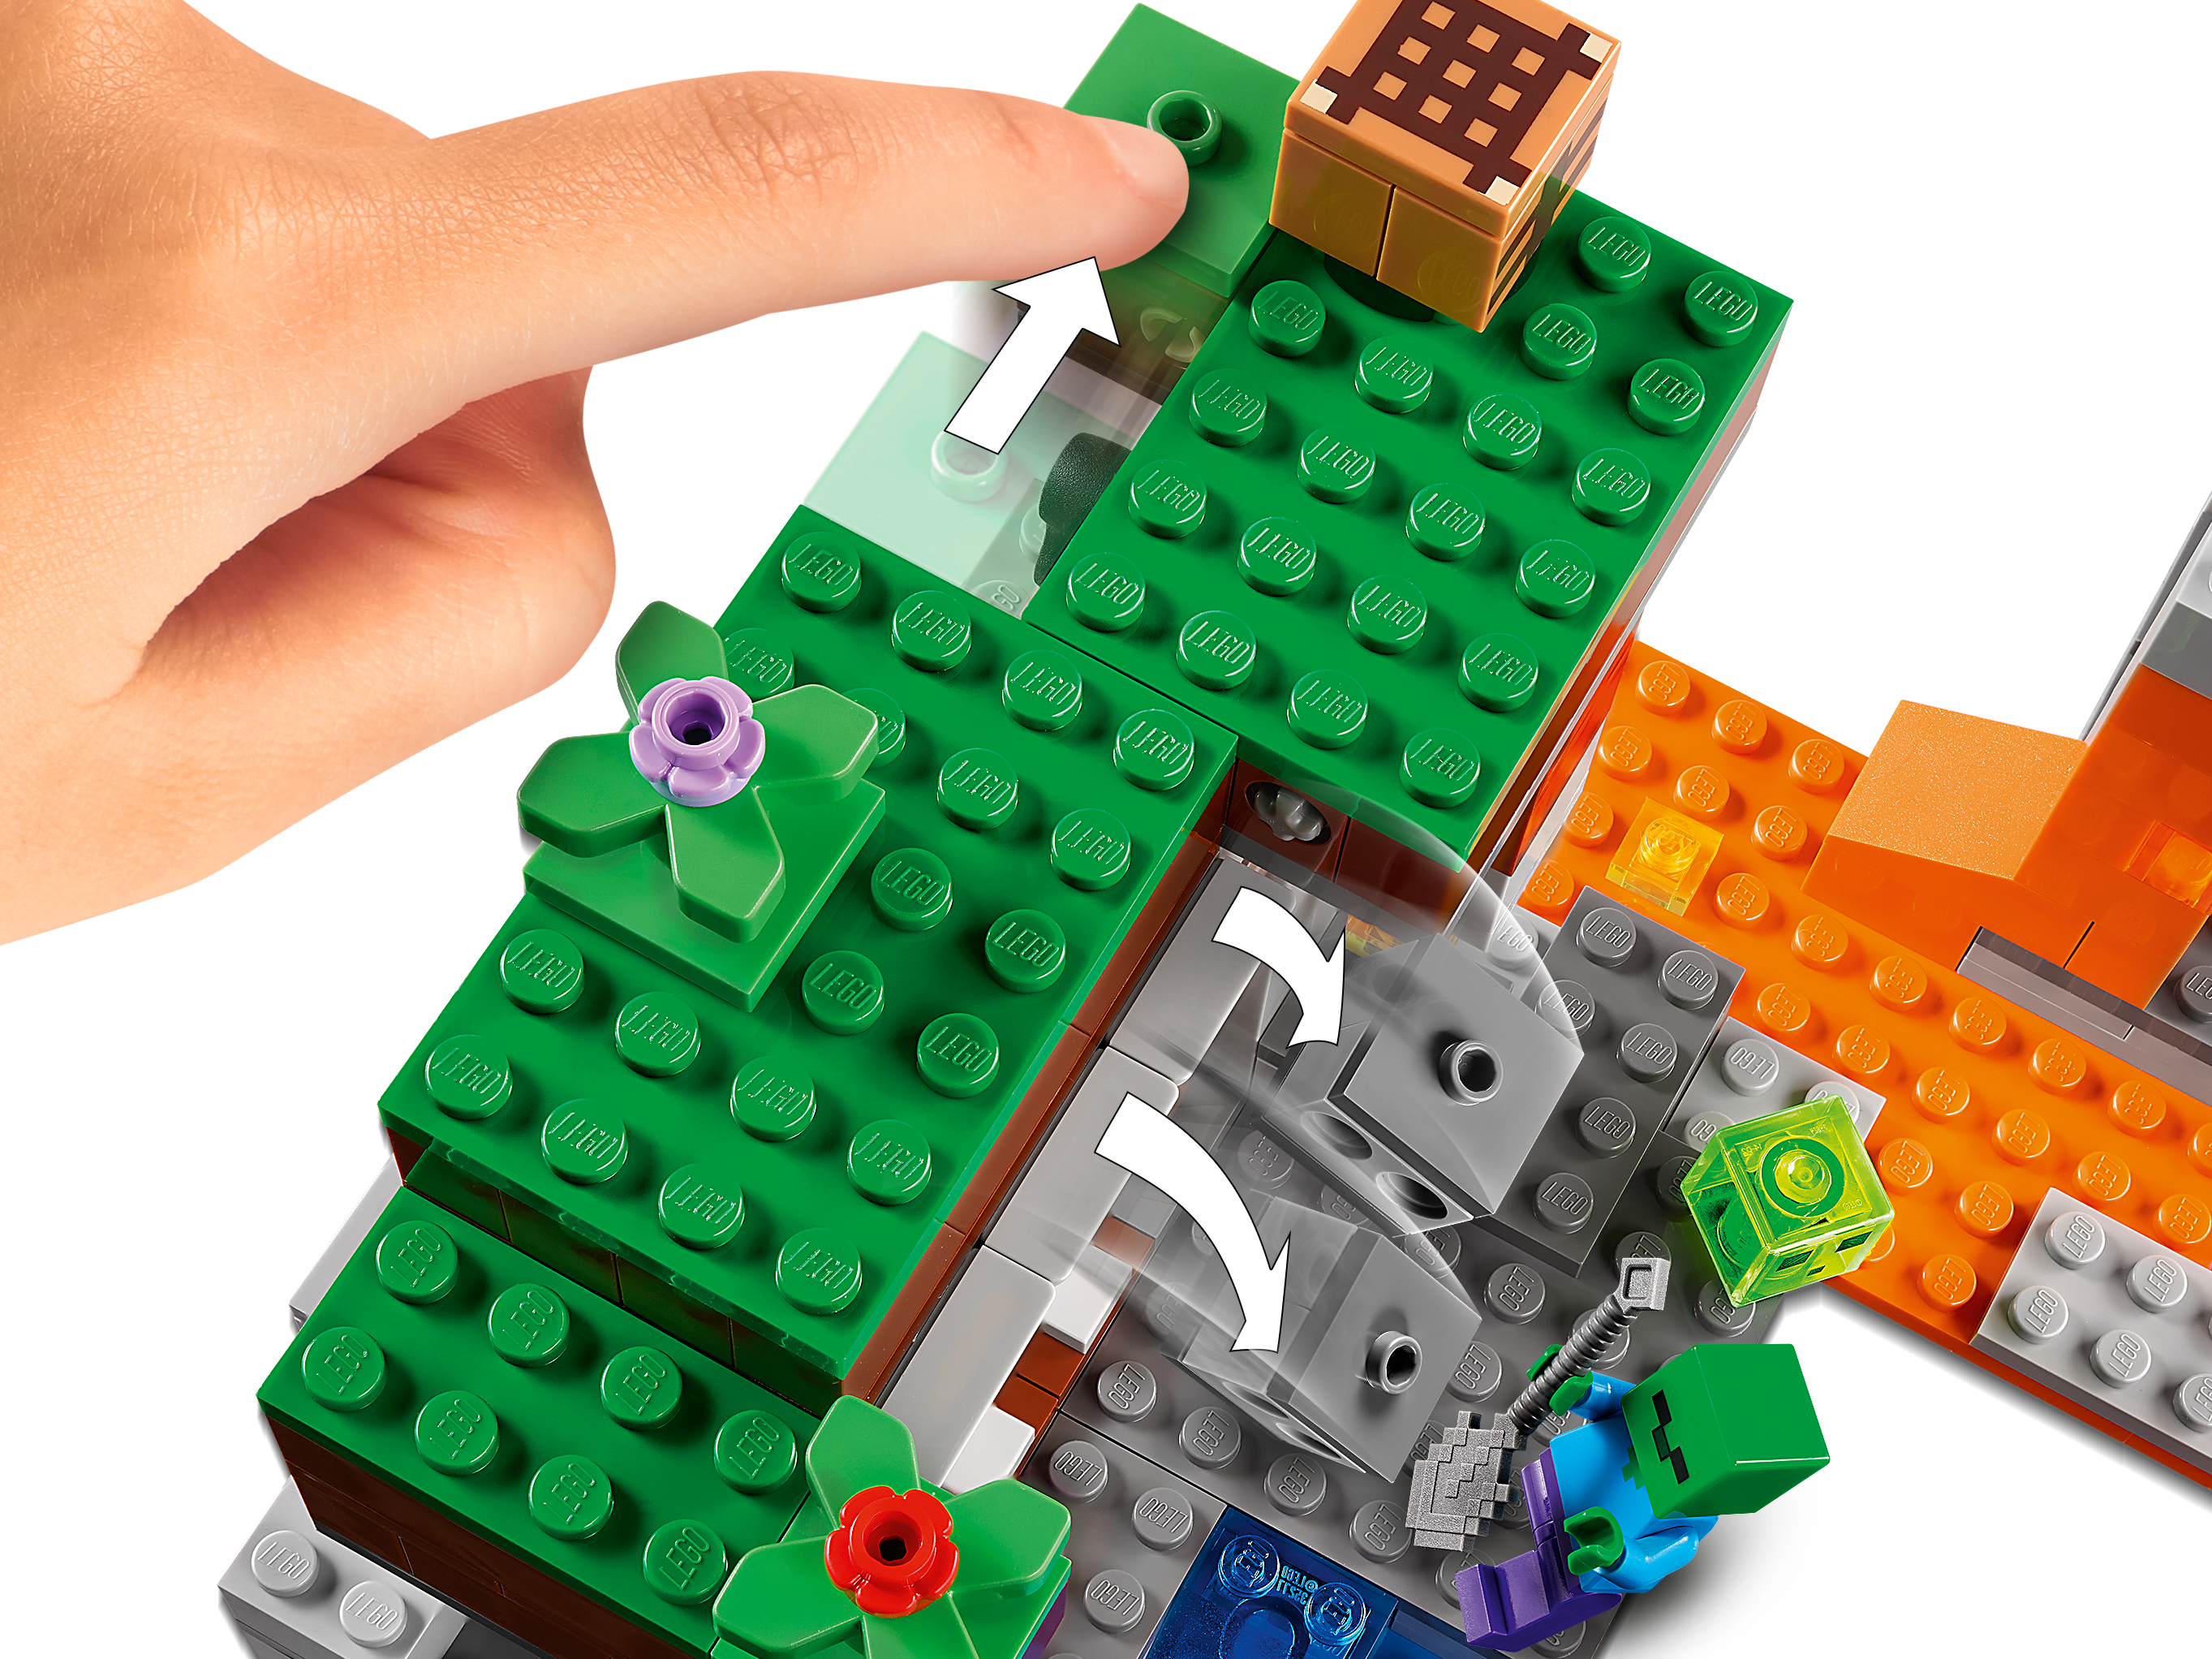 LEGO Minecraft The Abandoned Mine Building Toy, 21166 Zombie Cave with  Slime, Steve & Spider Figures, Gift idea for Kids, Boys and Girls Age 7  plus 